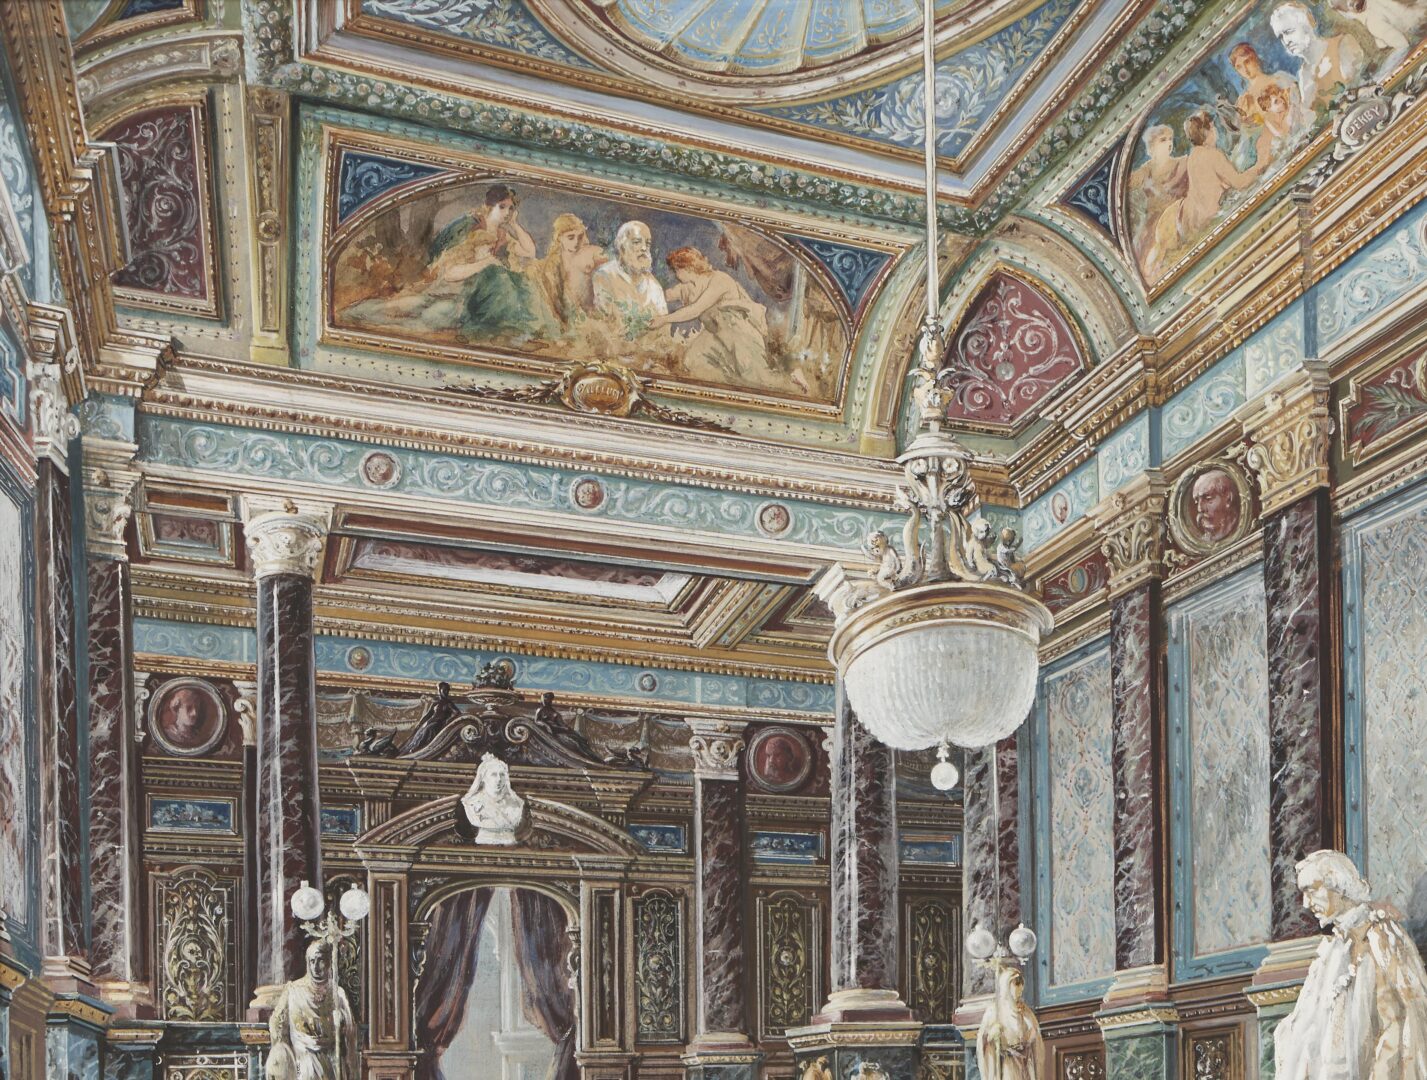 Lot 668: English Palace Interior Watercolor & THE KING'S PICTURES, Vol. I-III